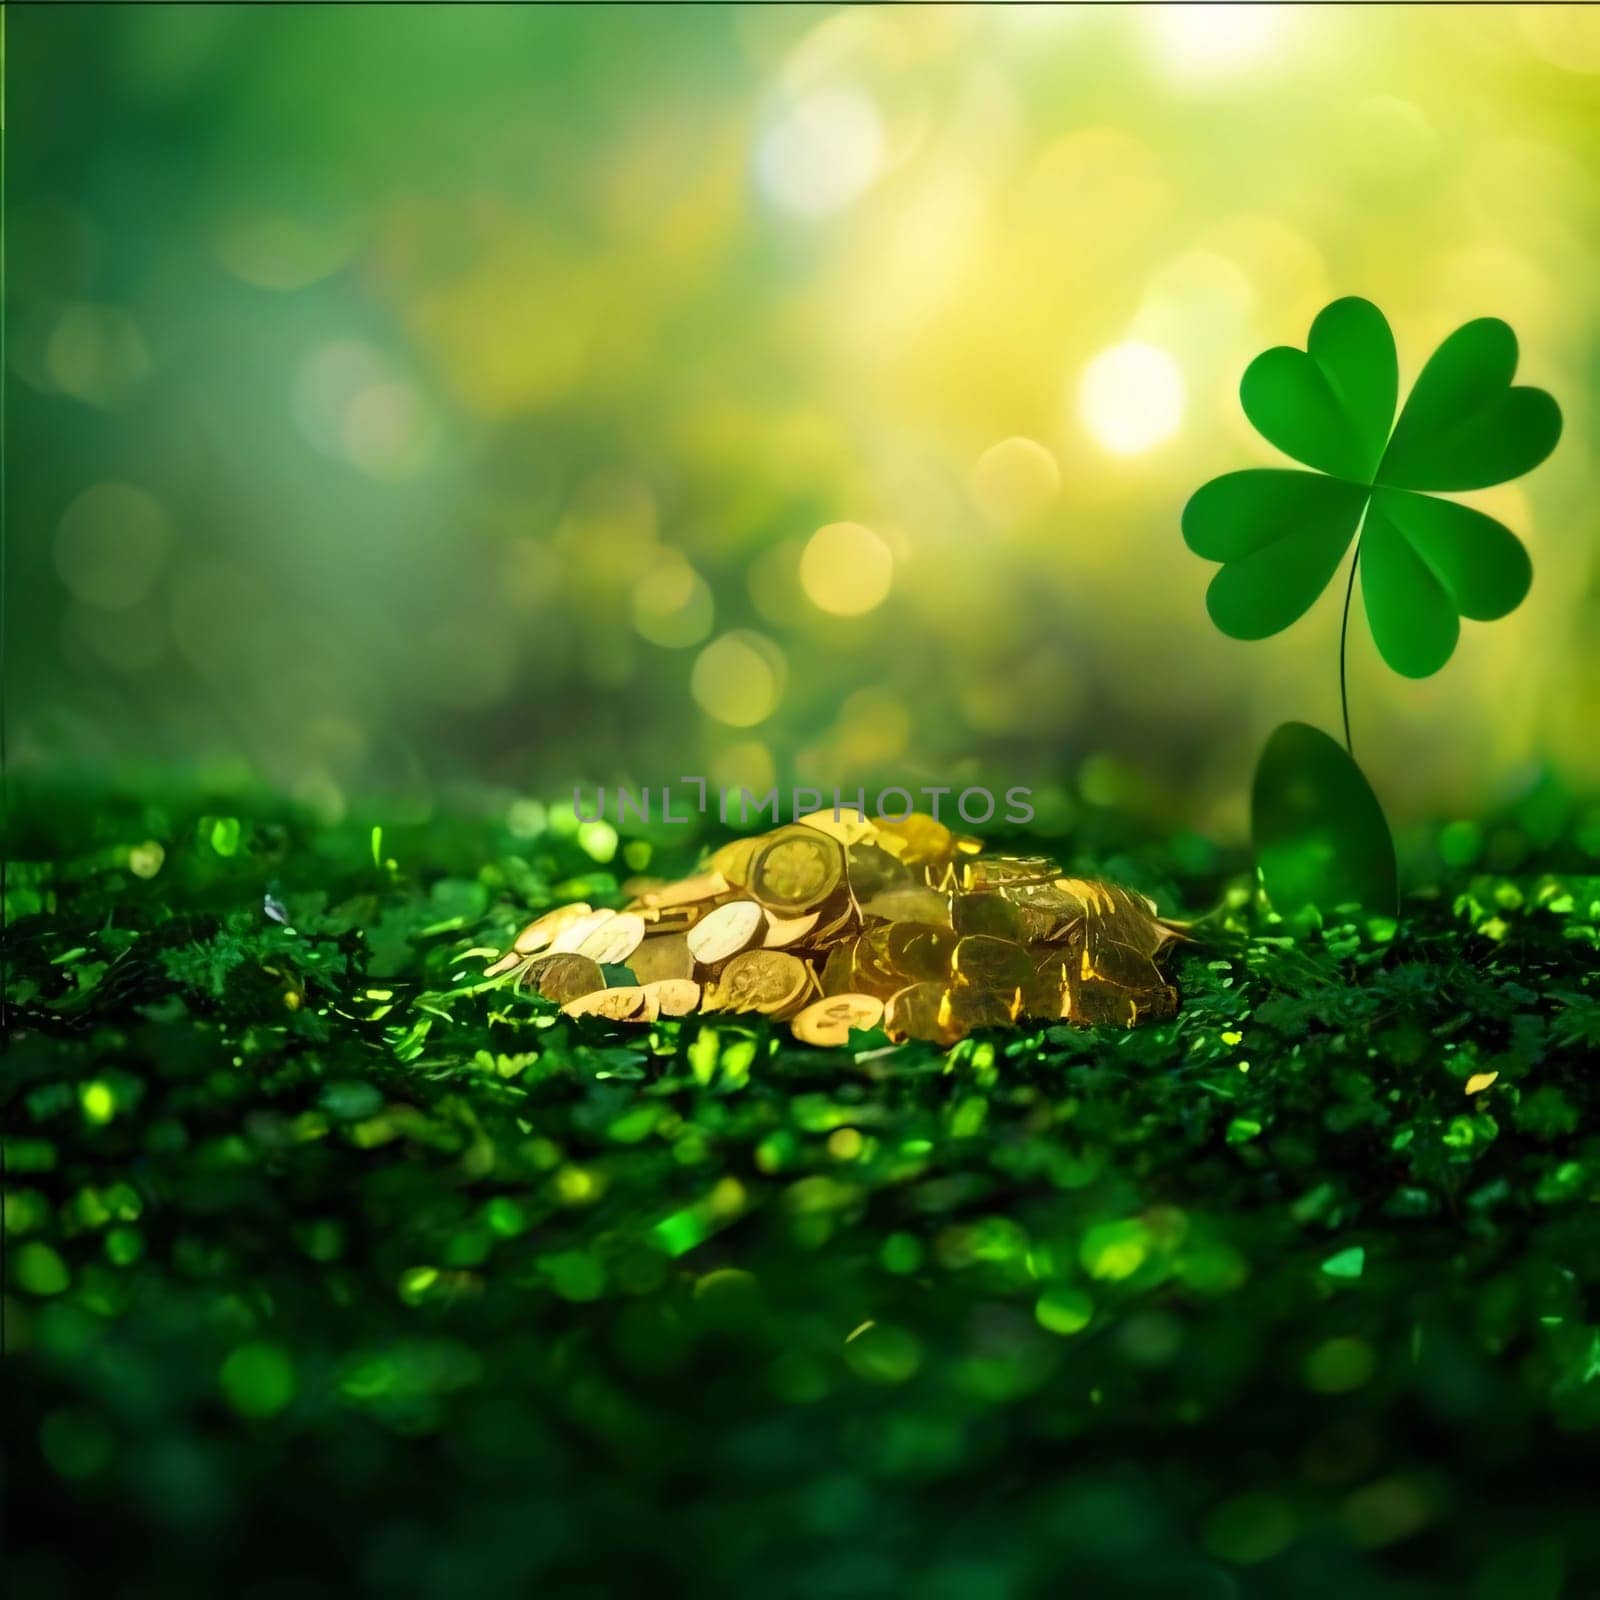 Green four-leaf clover scattered gold coins, bokeh effect banner with space for your own content. Green four-leaf clover symbol of St. Patrick's Day. by ThemesS